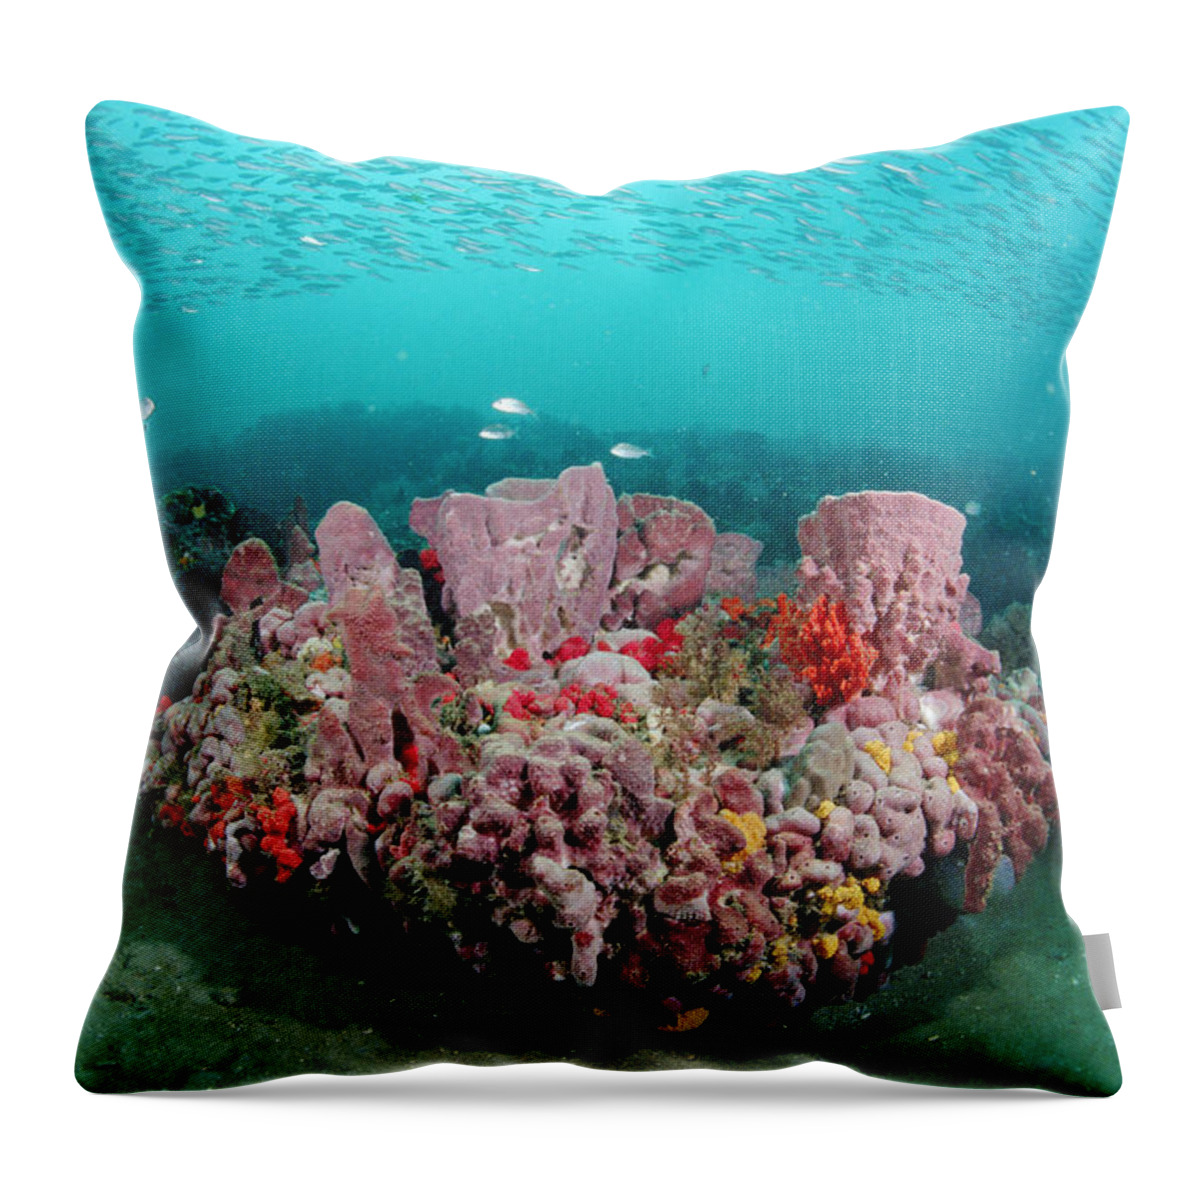 00126192 Throw Pillow featuring the photograph Coral And Schooling Fish Grays Reef Nms by Flip Nicklin